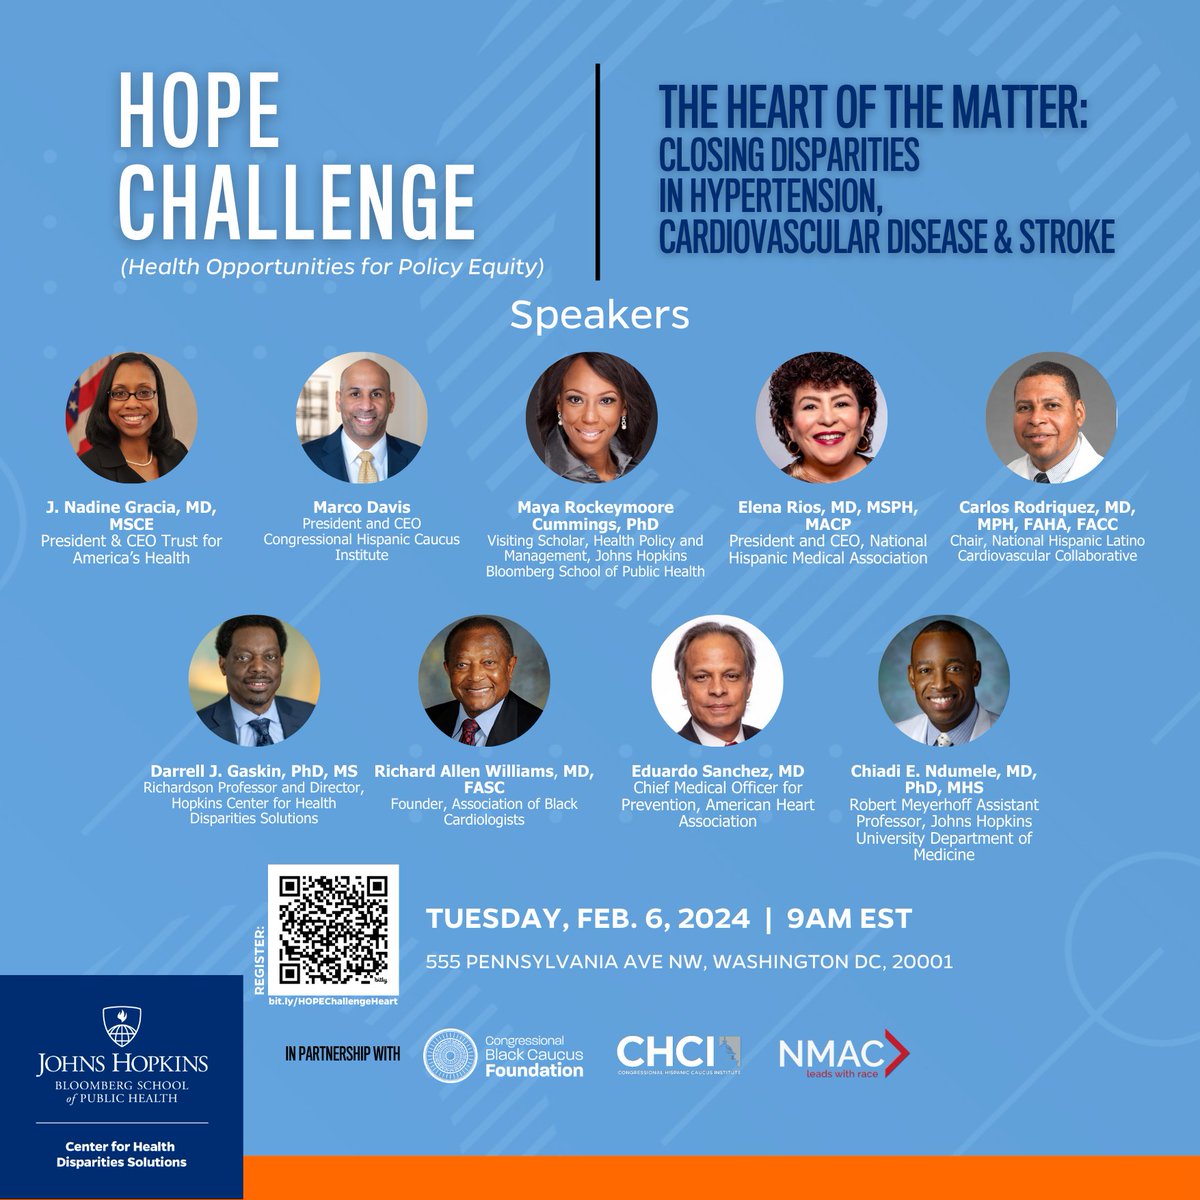 🚨Speakers reveal🚨 We are happy to announce the speakers for our upcoming HOPE Challenge event 'The Heart of the Matter: Closing Disparities in Hypertension, Cardiovascular Disease and Stroke.' Register Here: bit.ly/3Hj97XS @BSPH_HPM @CHCI @NMACCommunity